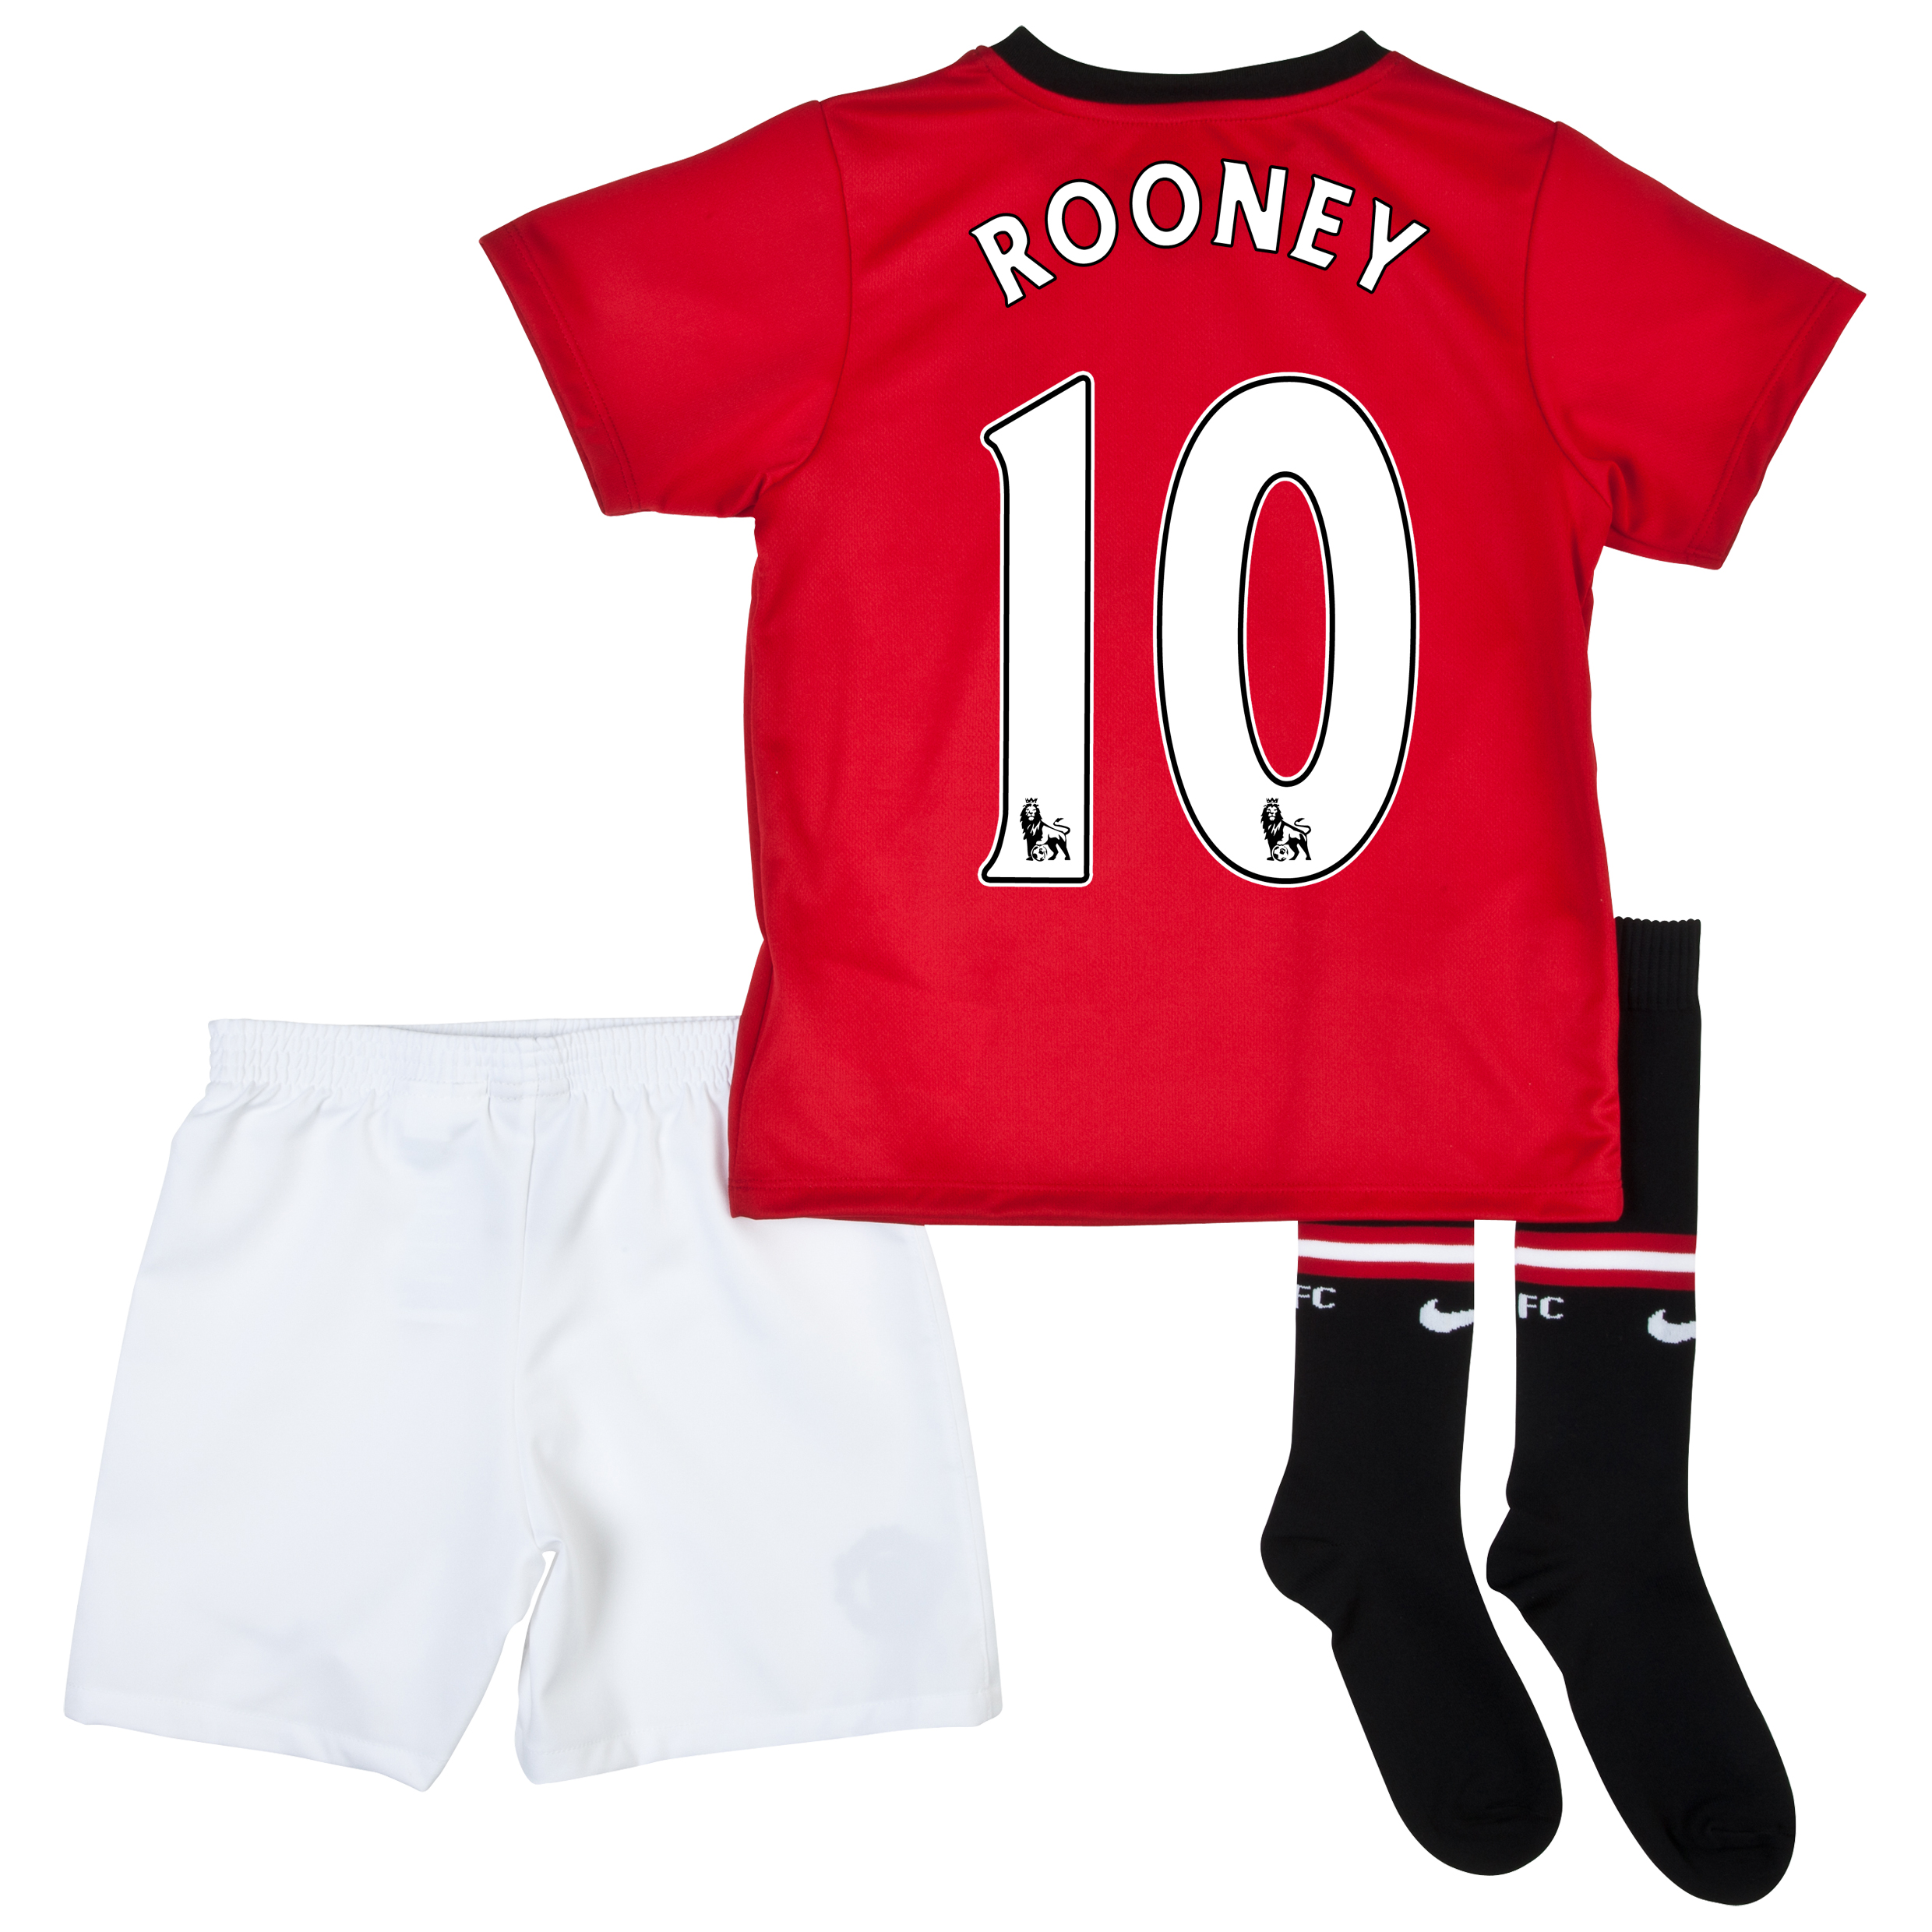 Manchester United Home Kit 2013/14 - Little Boys with Rooney 10 printing